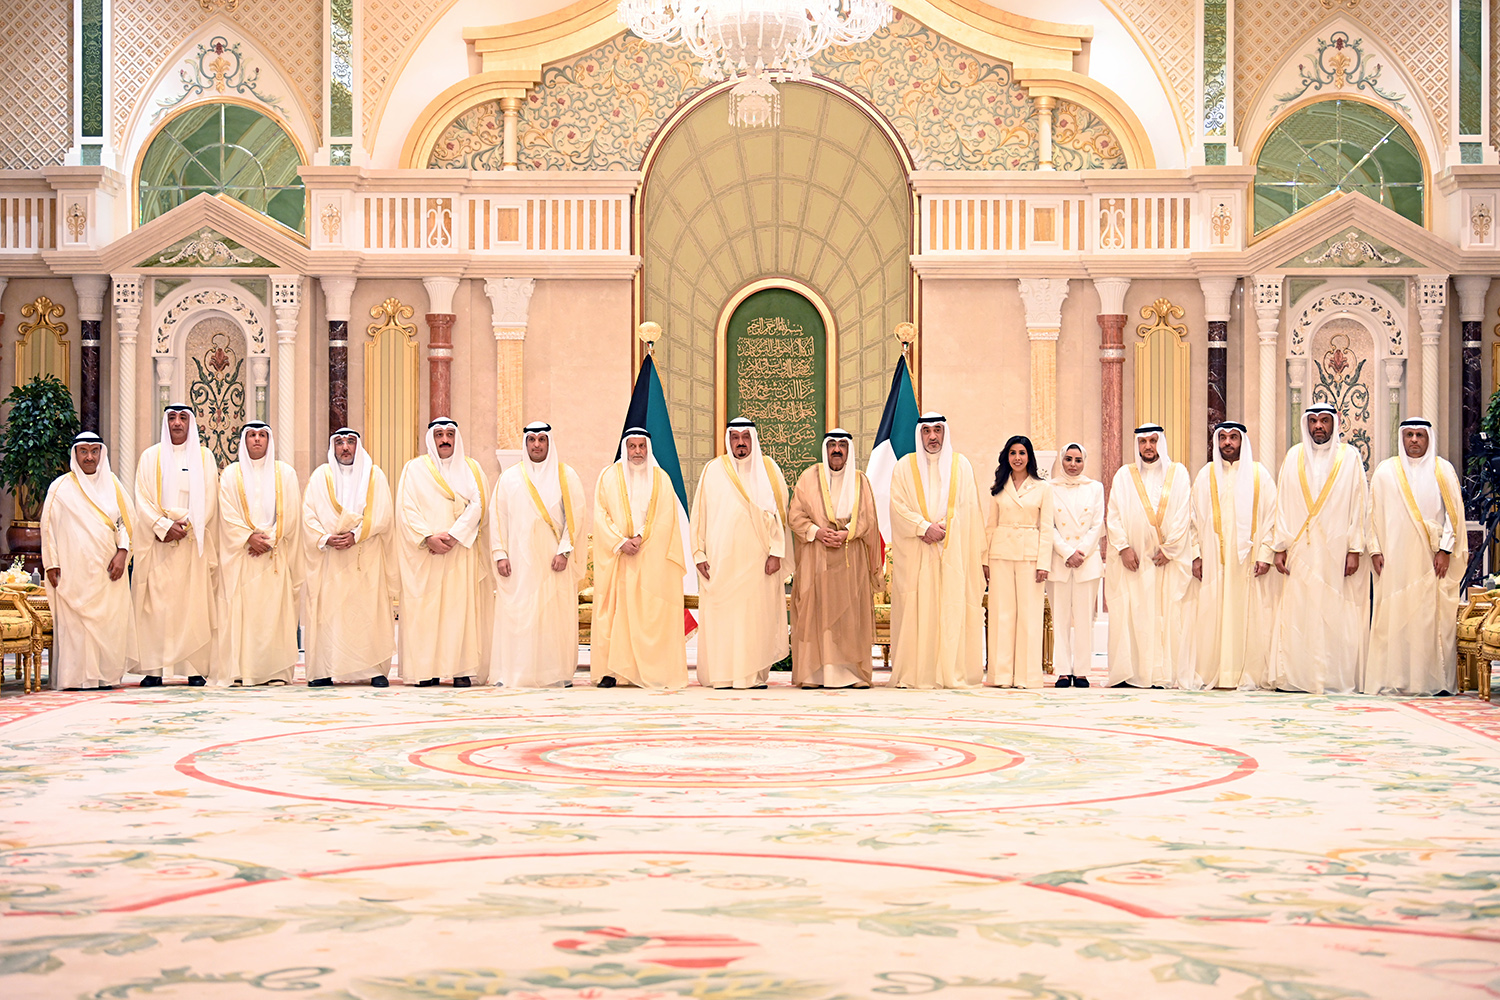 His Highness the Amir Sheikh Meshal Al-Ahmad Al-Jaber Al-Sabah in a group photo with His Highness the Prime Minister and the new Ministers after taking constitutional oath